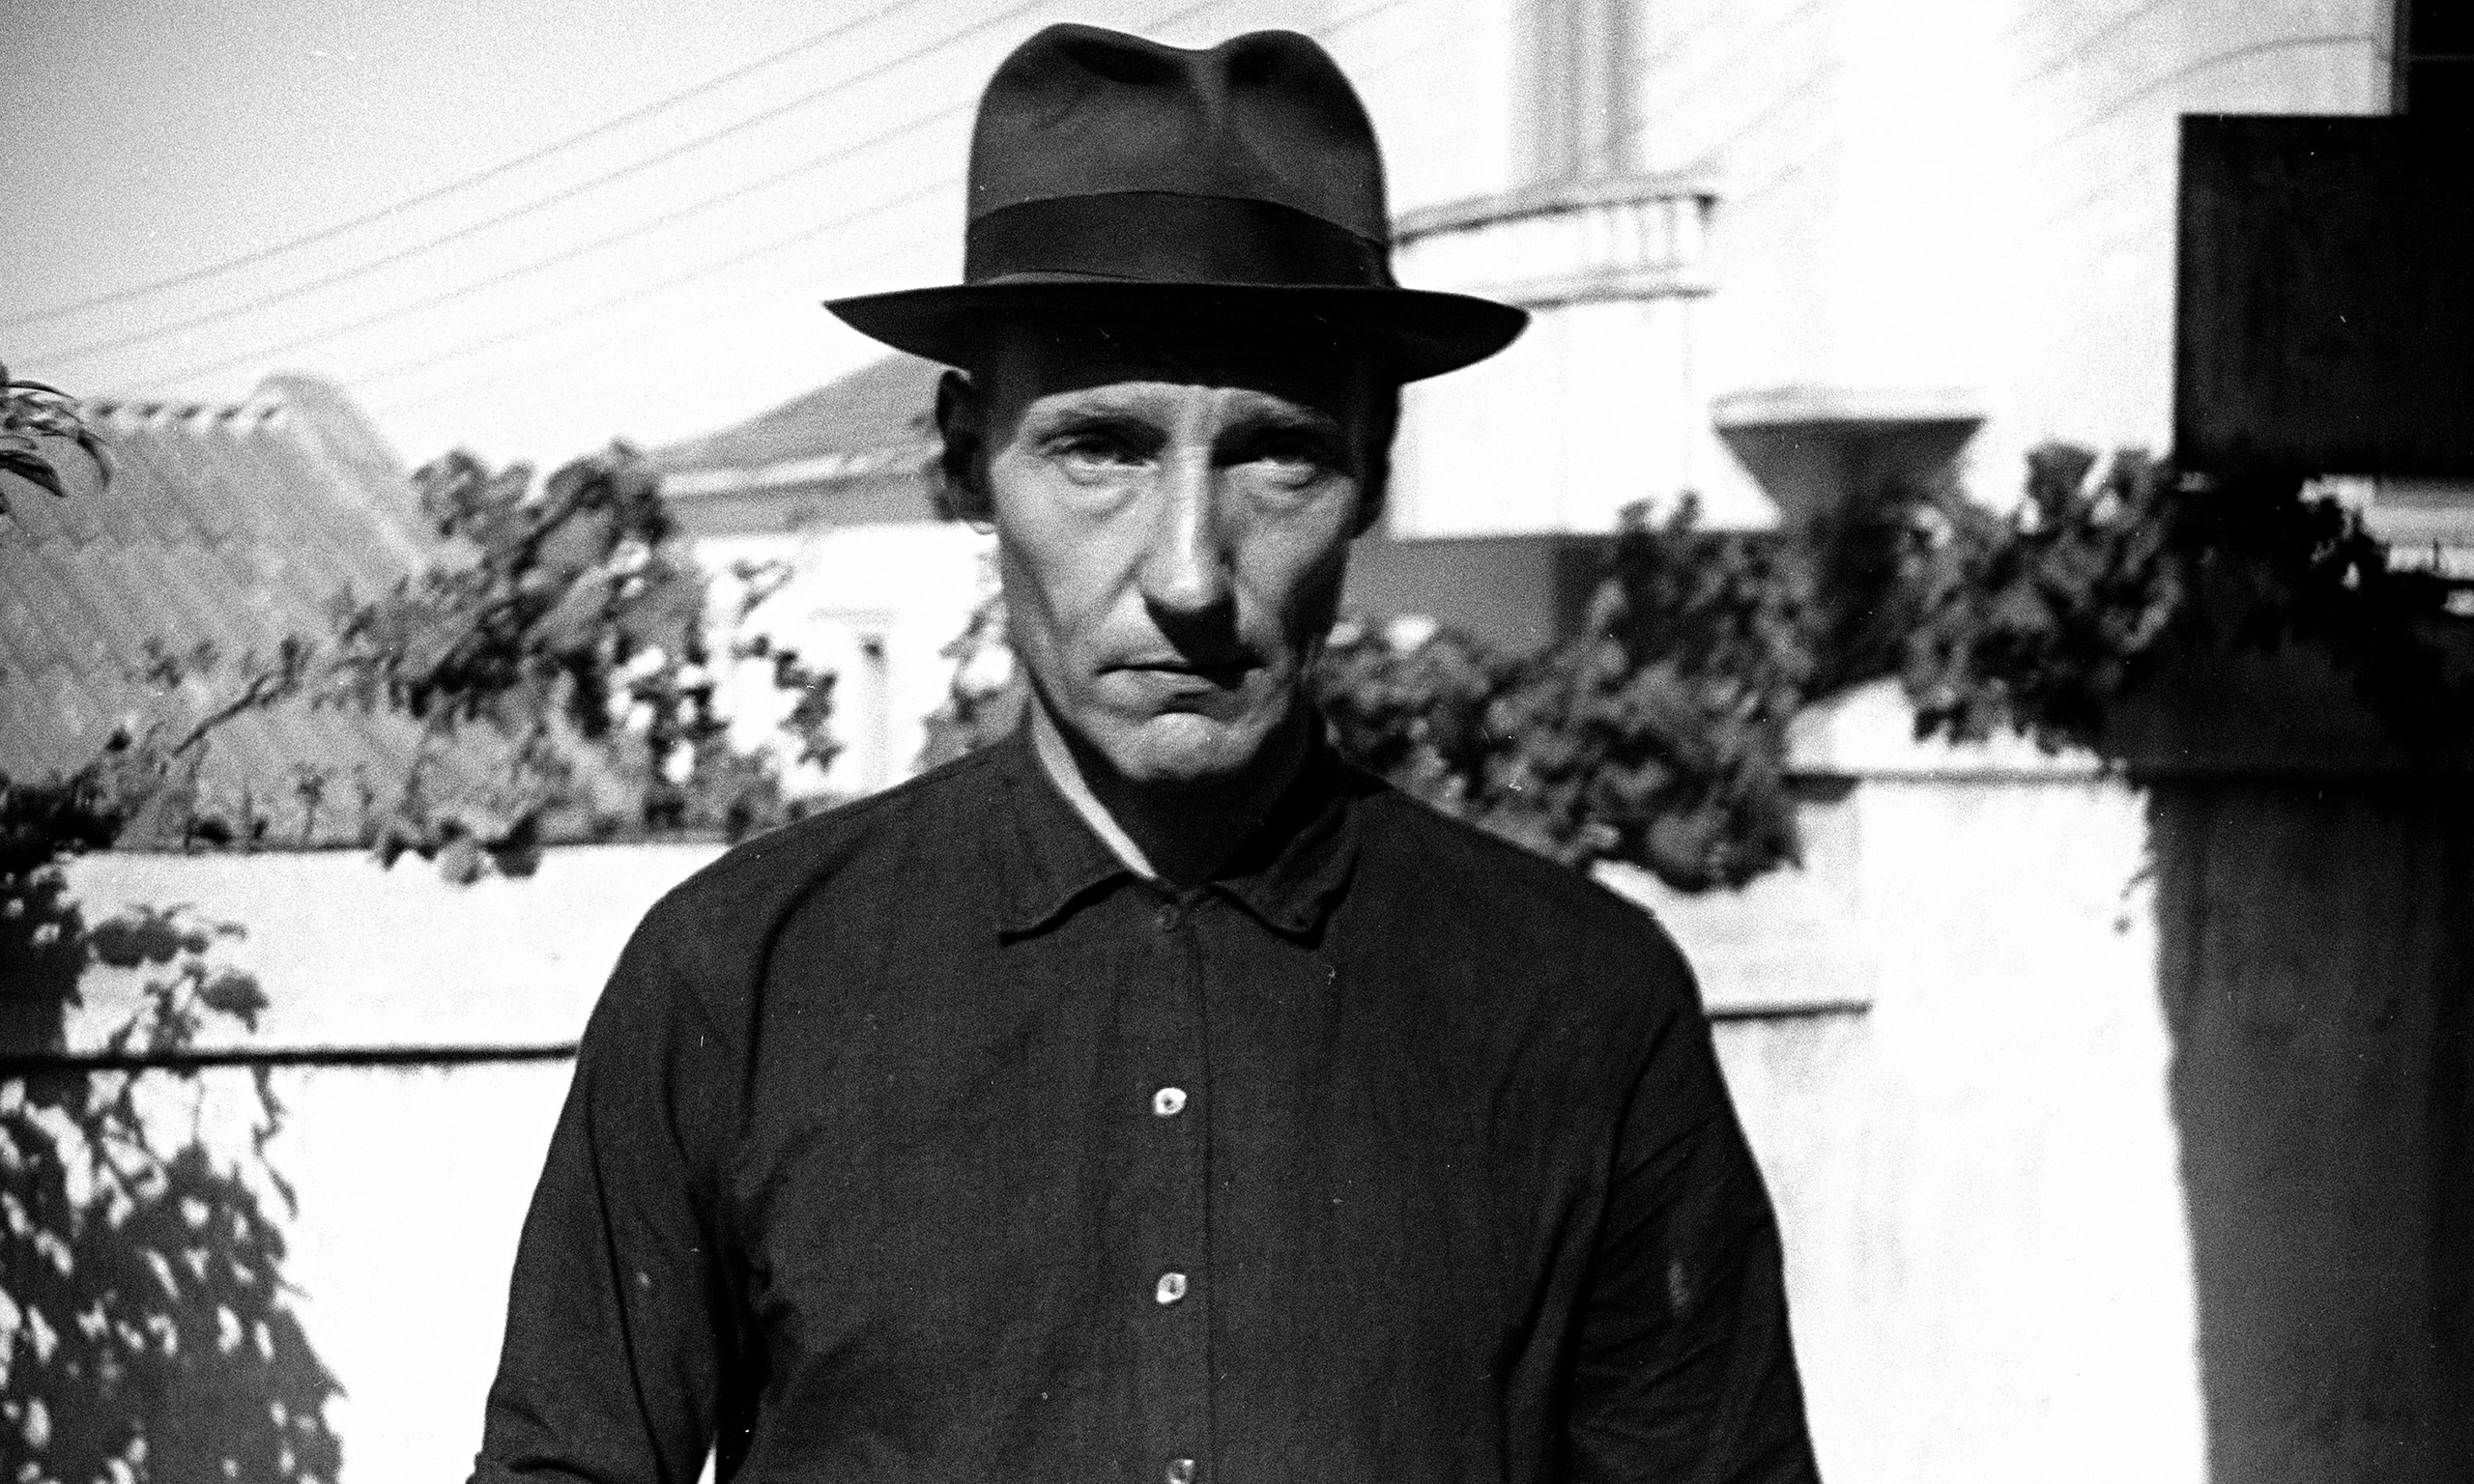 WILLIAM BURROUGHS | These Americans. An American Archive.